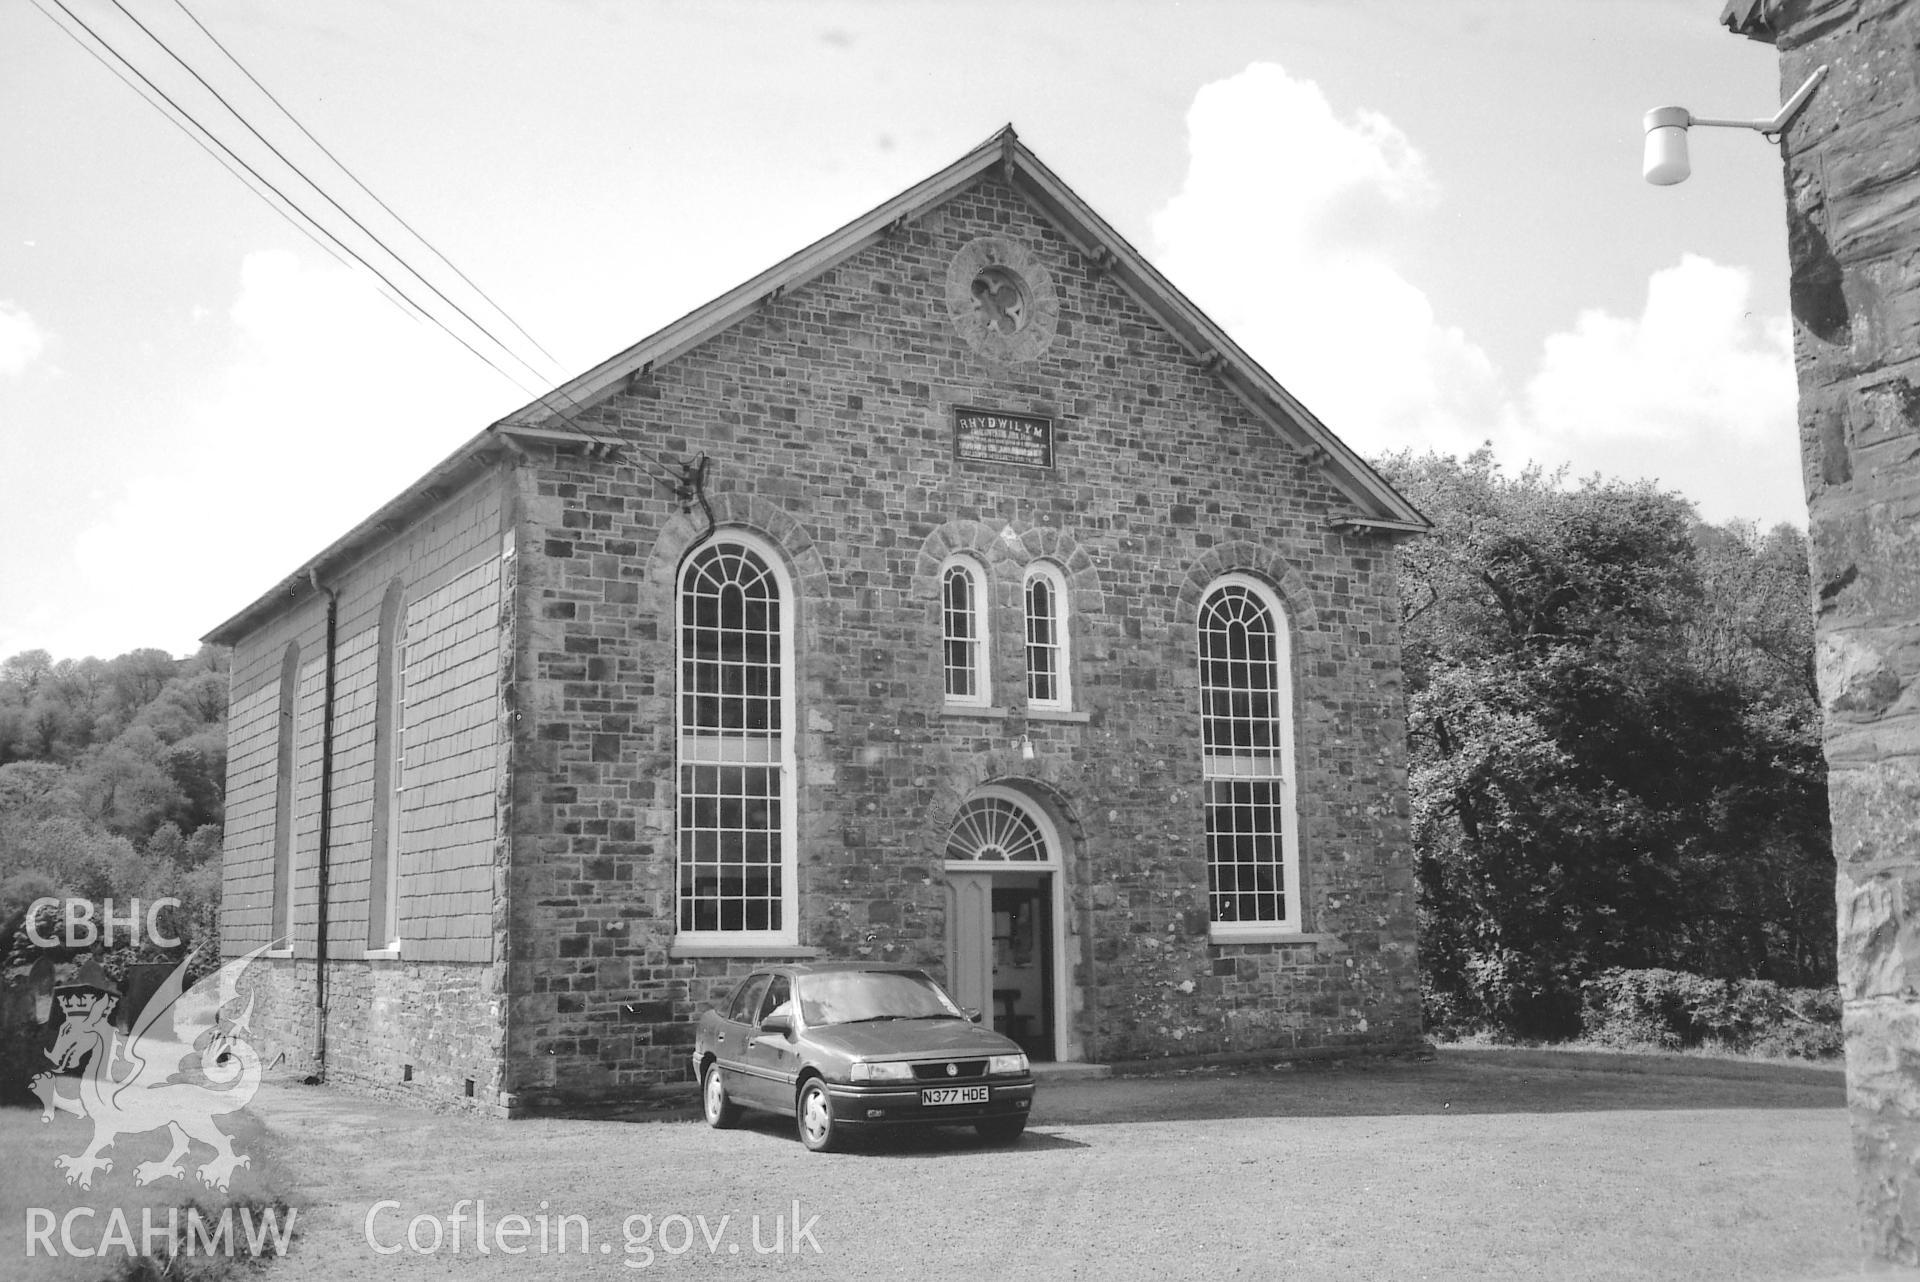 Digital copy of a black and white photograph showing an exterior view of Rhydwilym Baptist Chapel,Clynderwen, taken by Robert Scourfield, 1995.